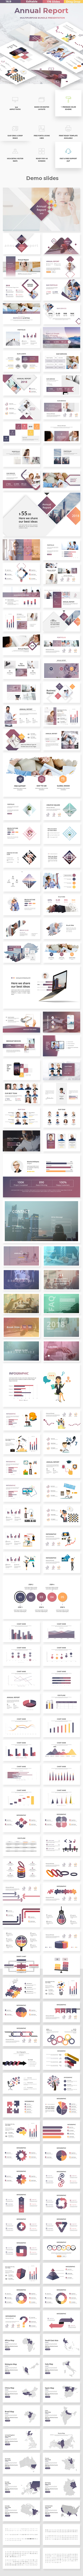 Annual Report - Business Powerpoint Template